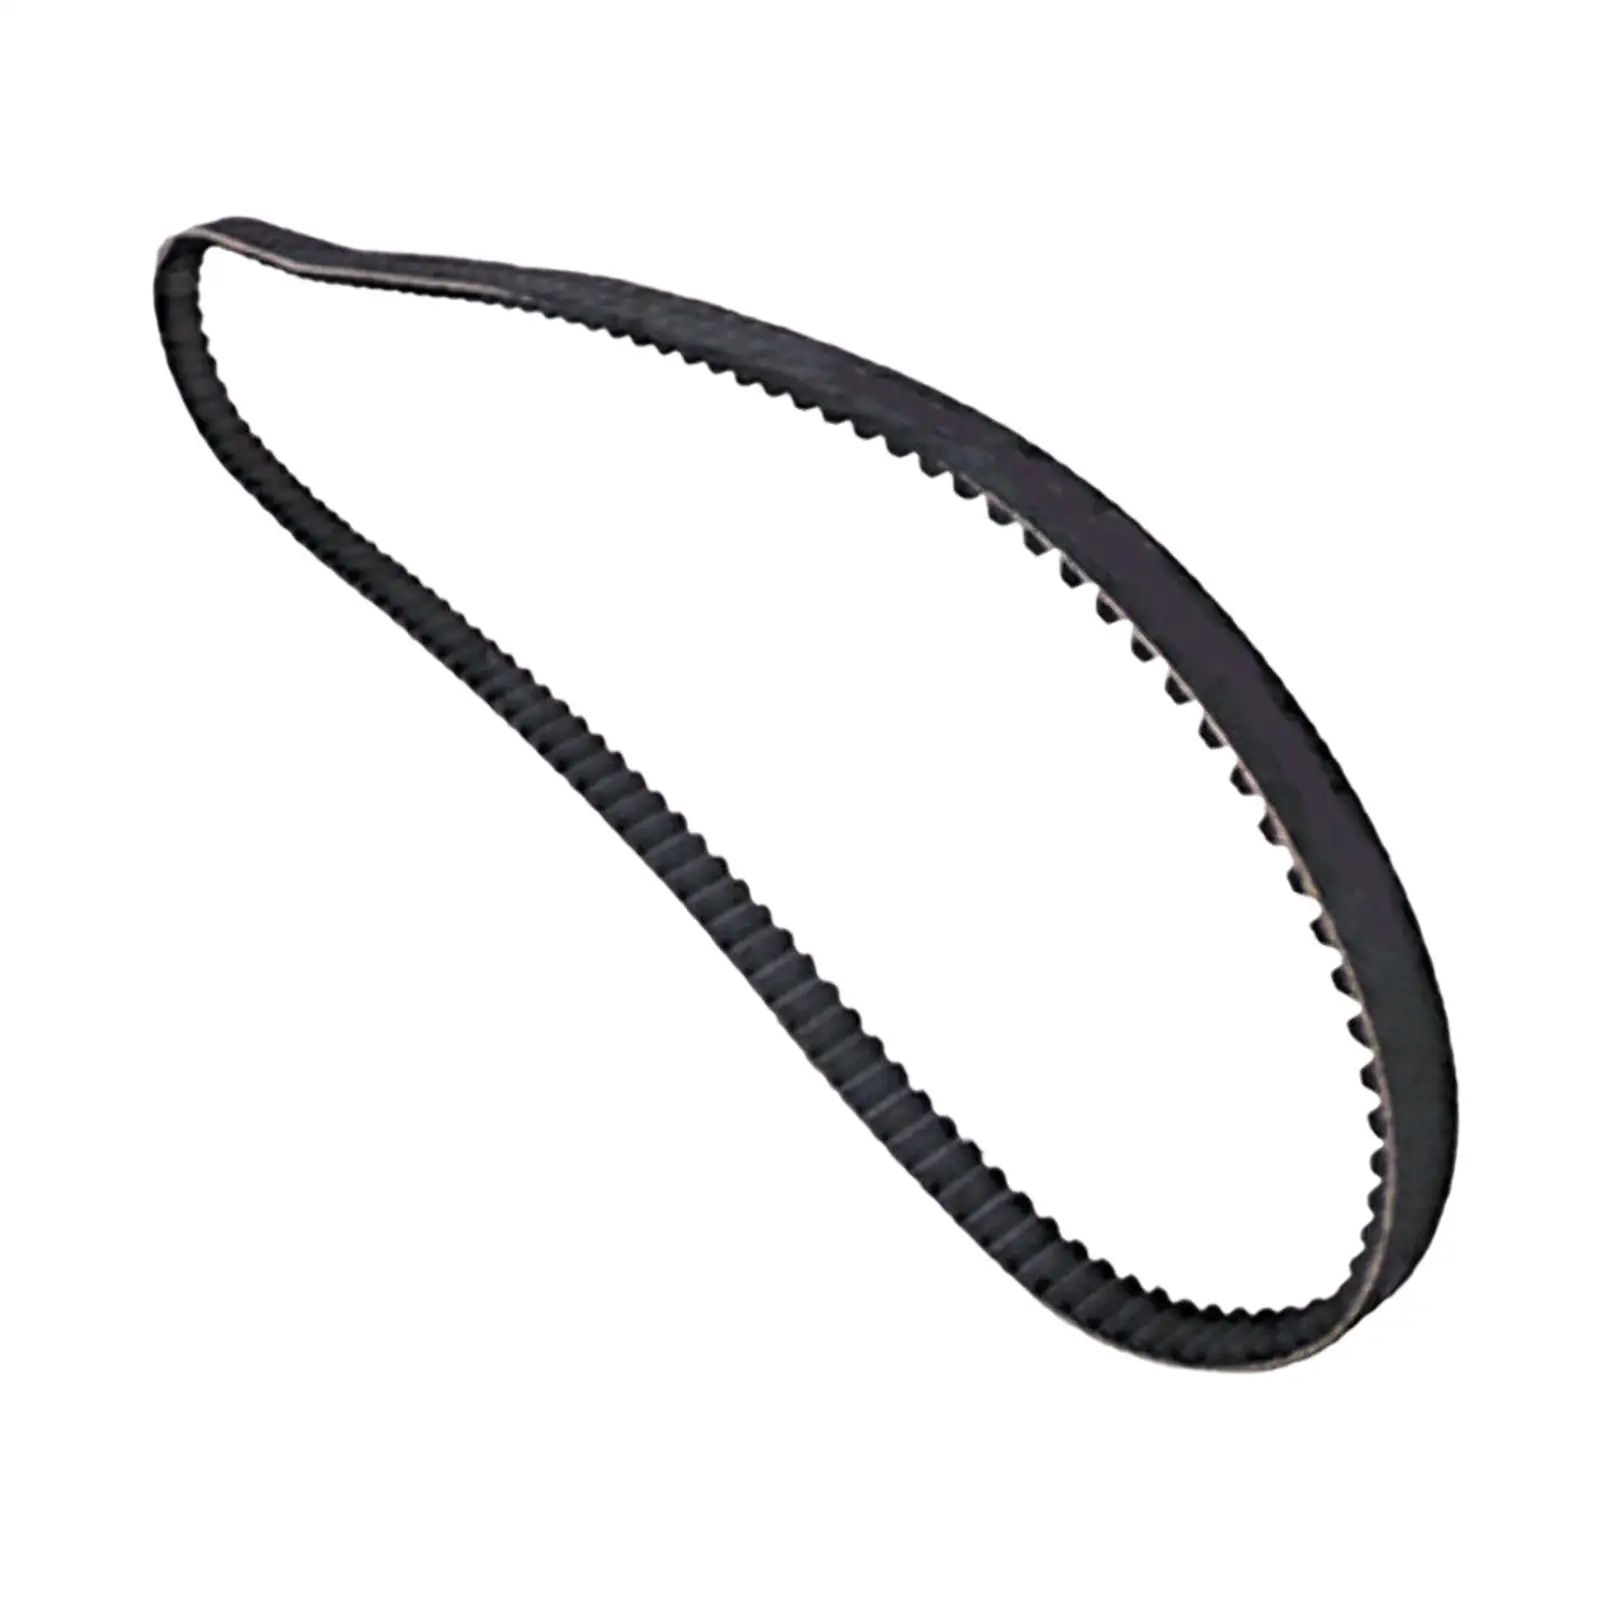 Rear Drive Belt 40015-90 Parabolic Tooth Profile 133 Tooth 1 1/2